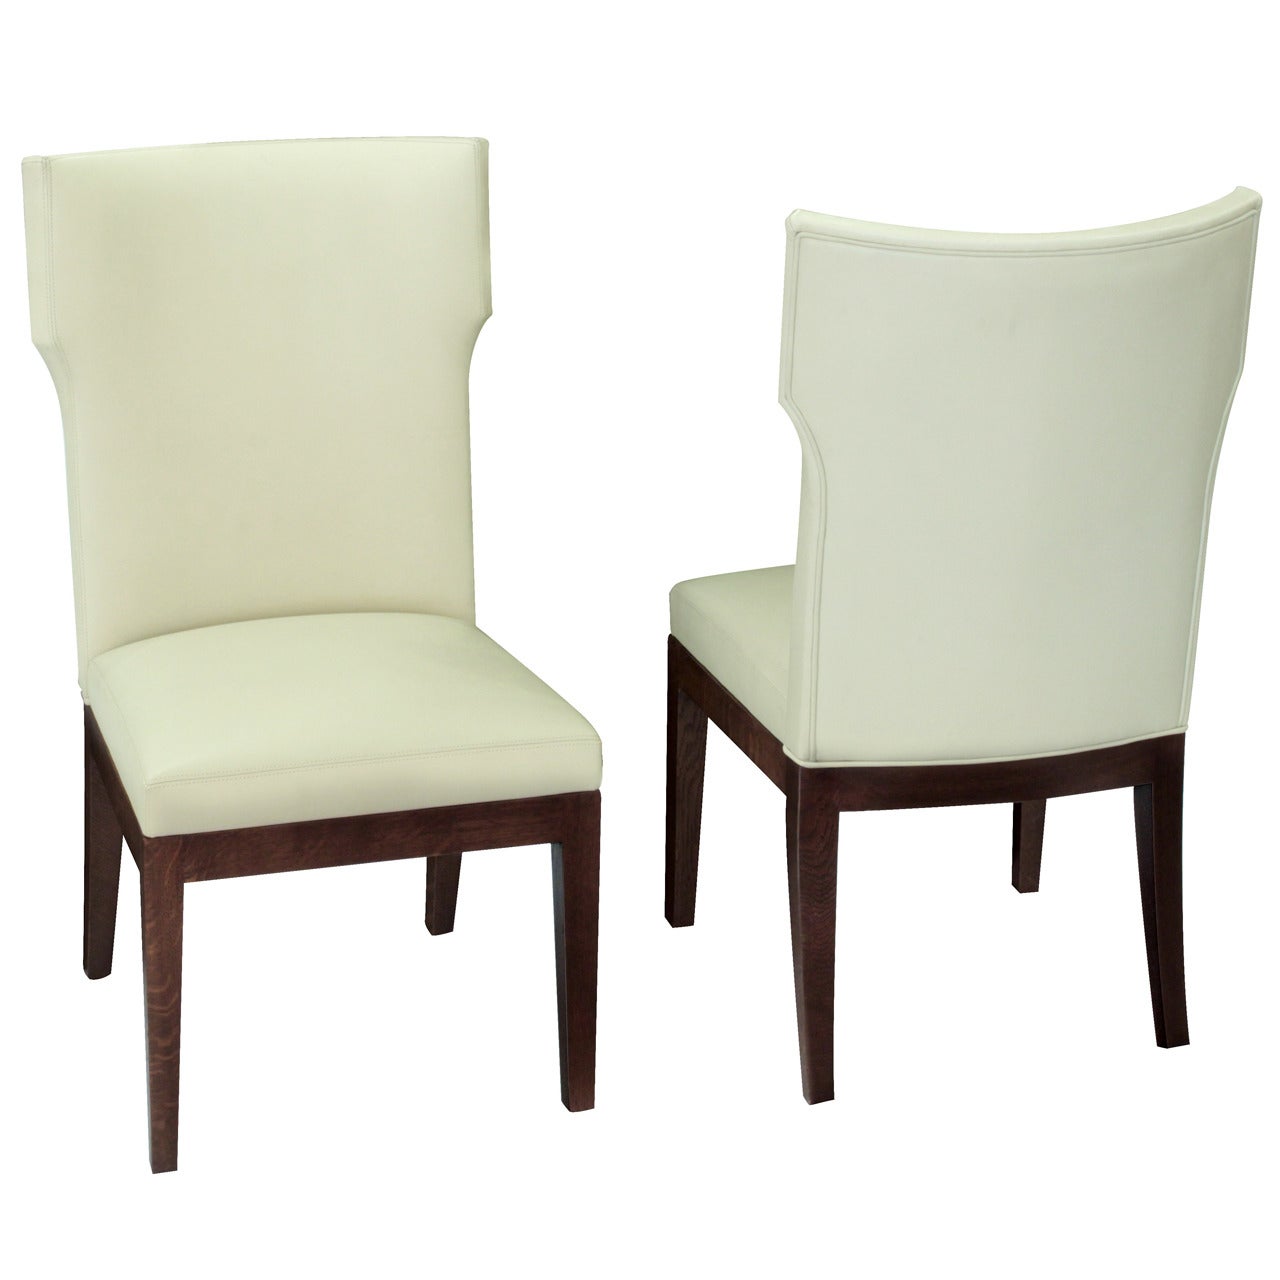 Set of 12 "Barbuda" Dining Chairs by Christian Liagre